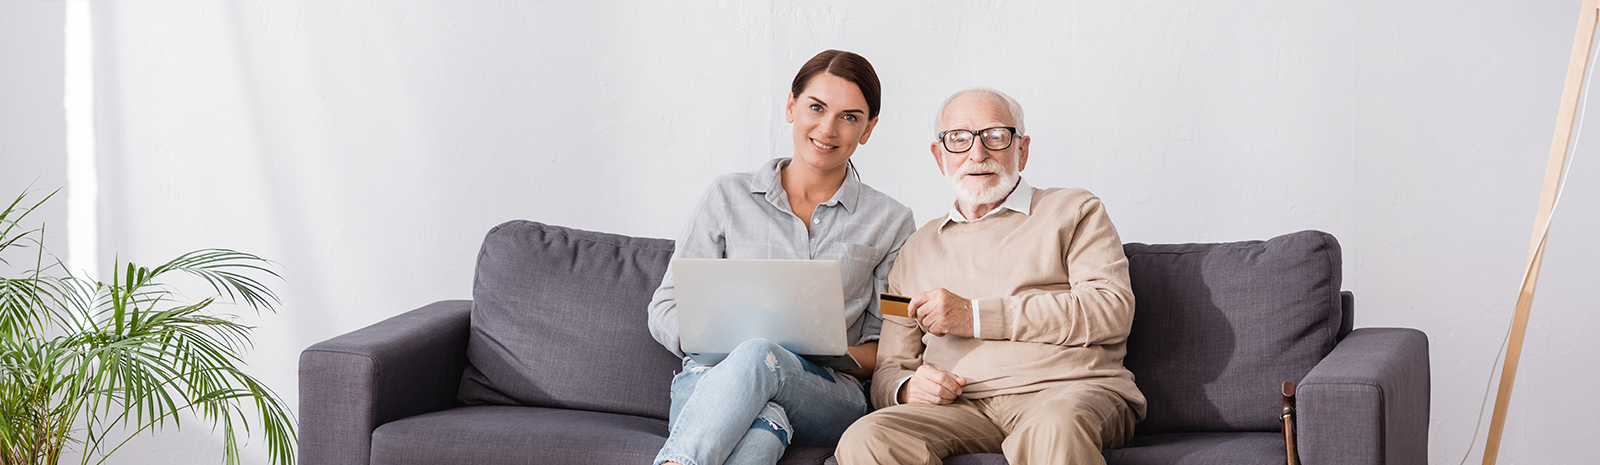 Elderly man and young woman with a laptop sit beside each other on couch.